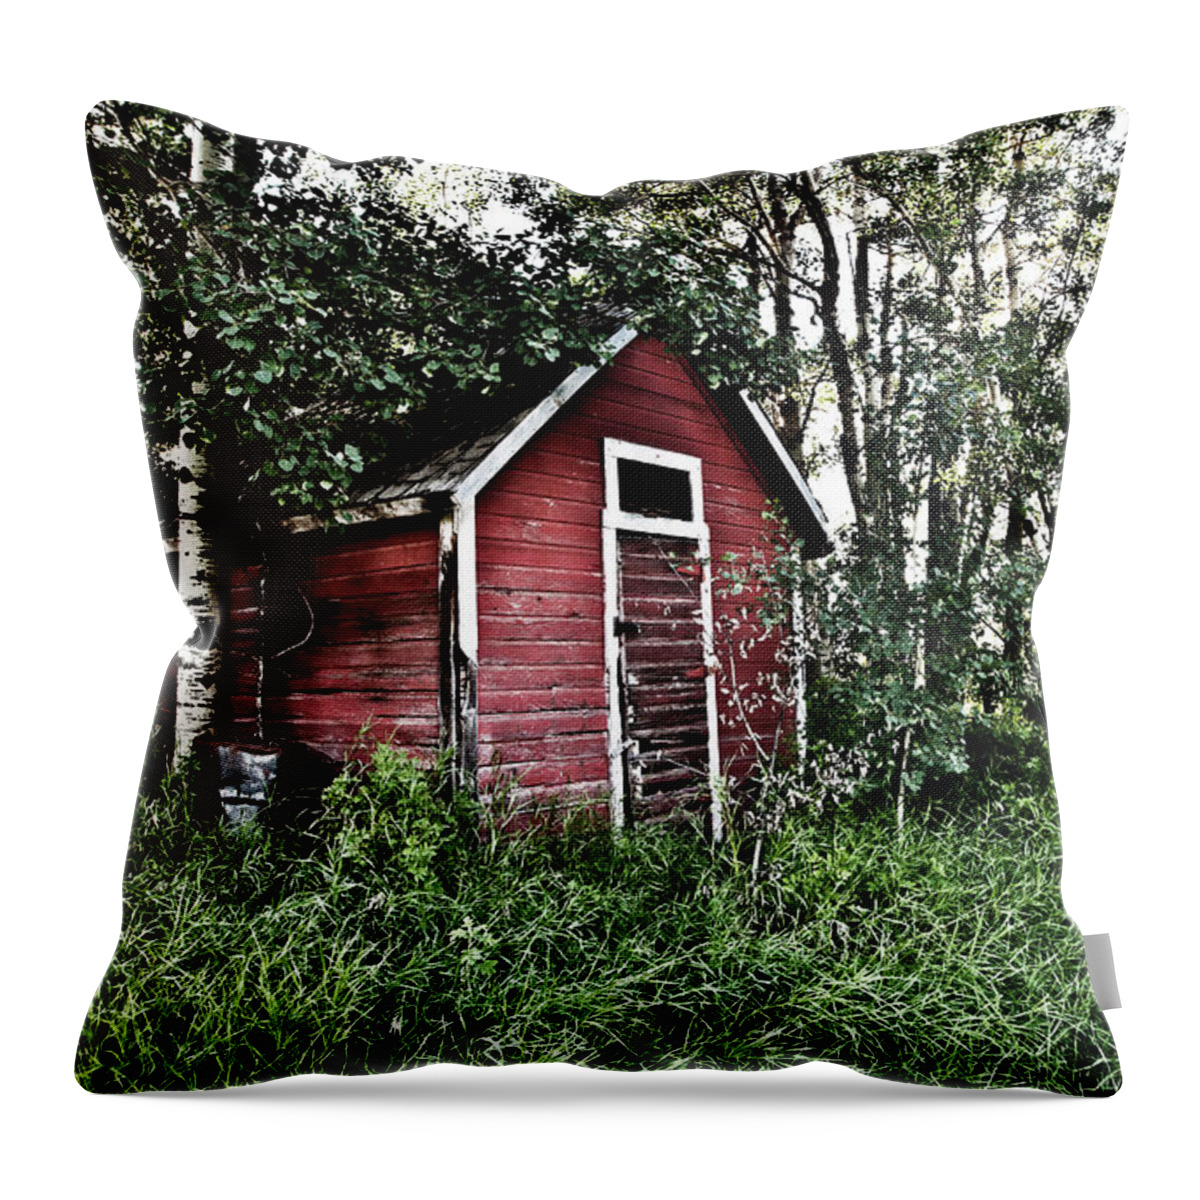 Barn Throw Pillow featuring the photograph In The Woods by Carmen Kern